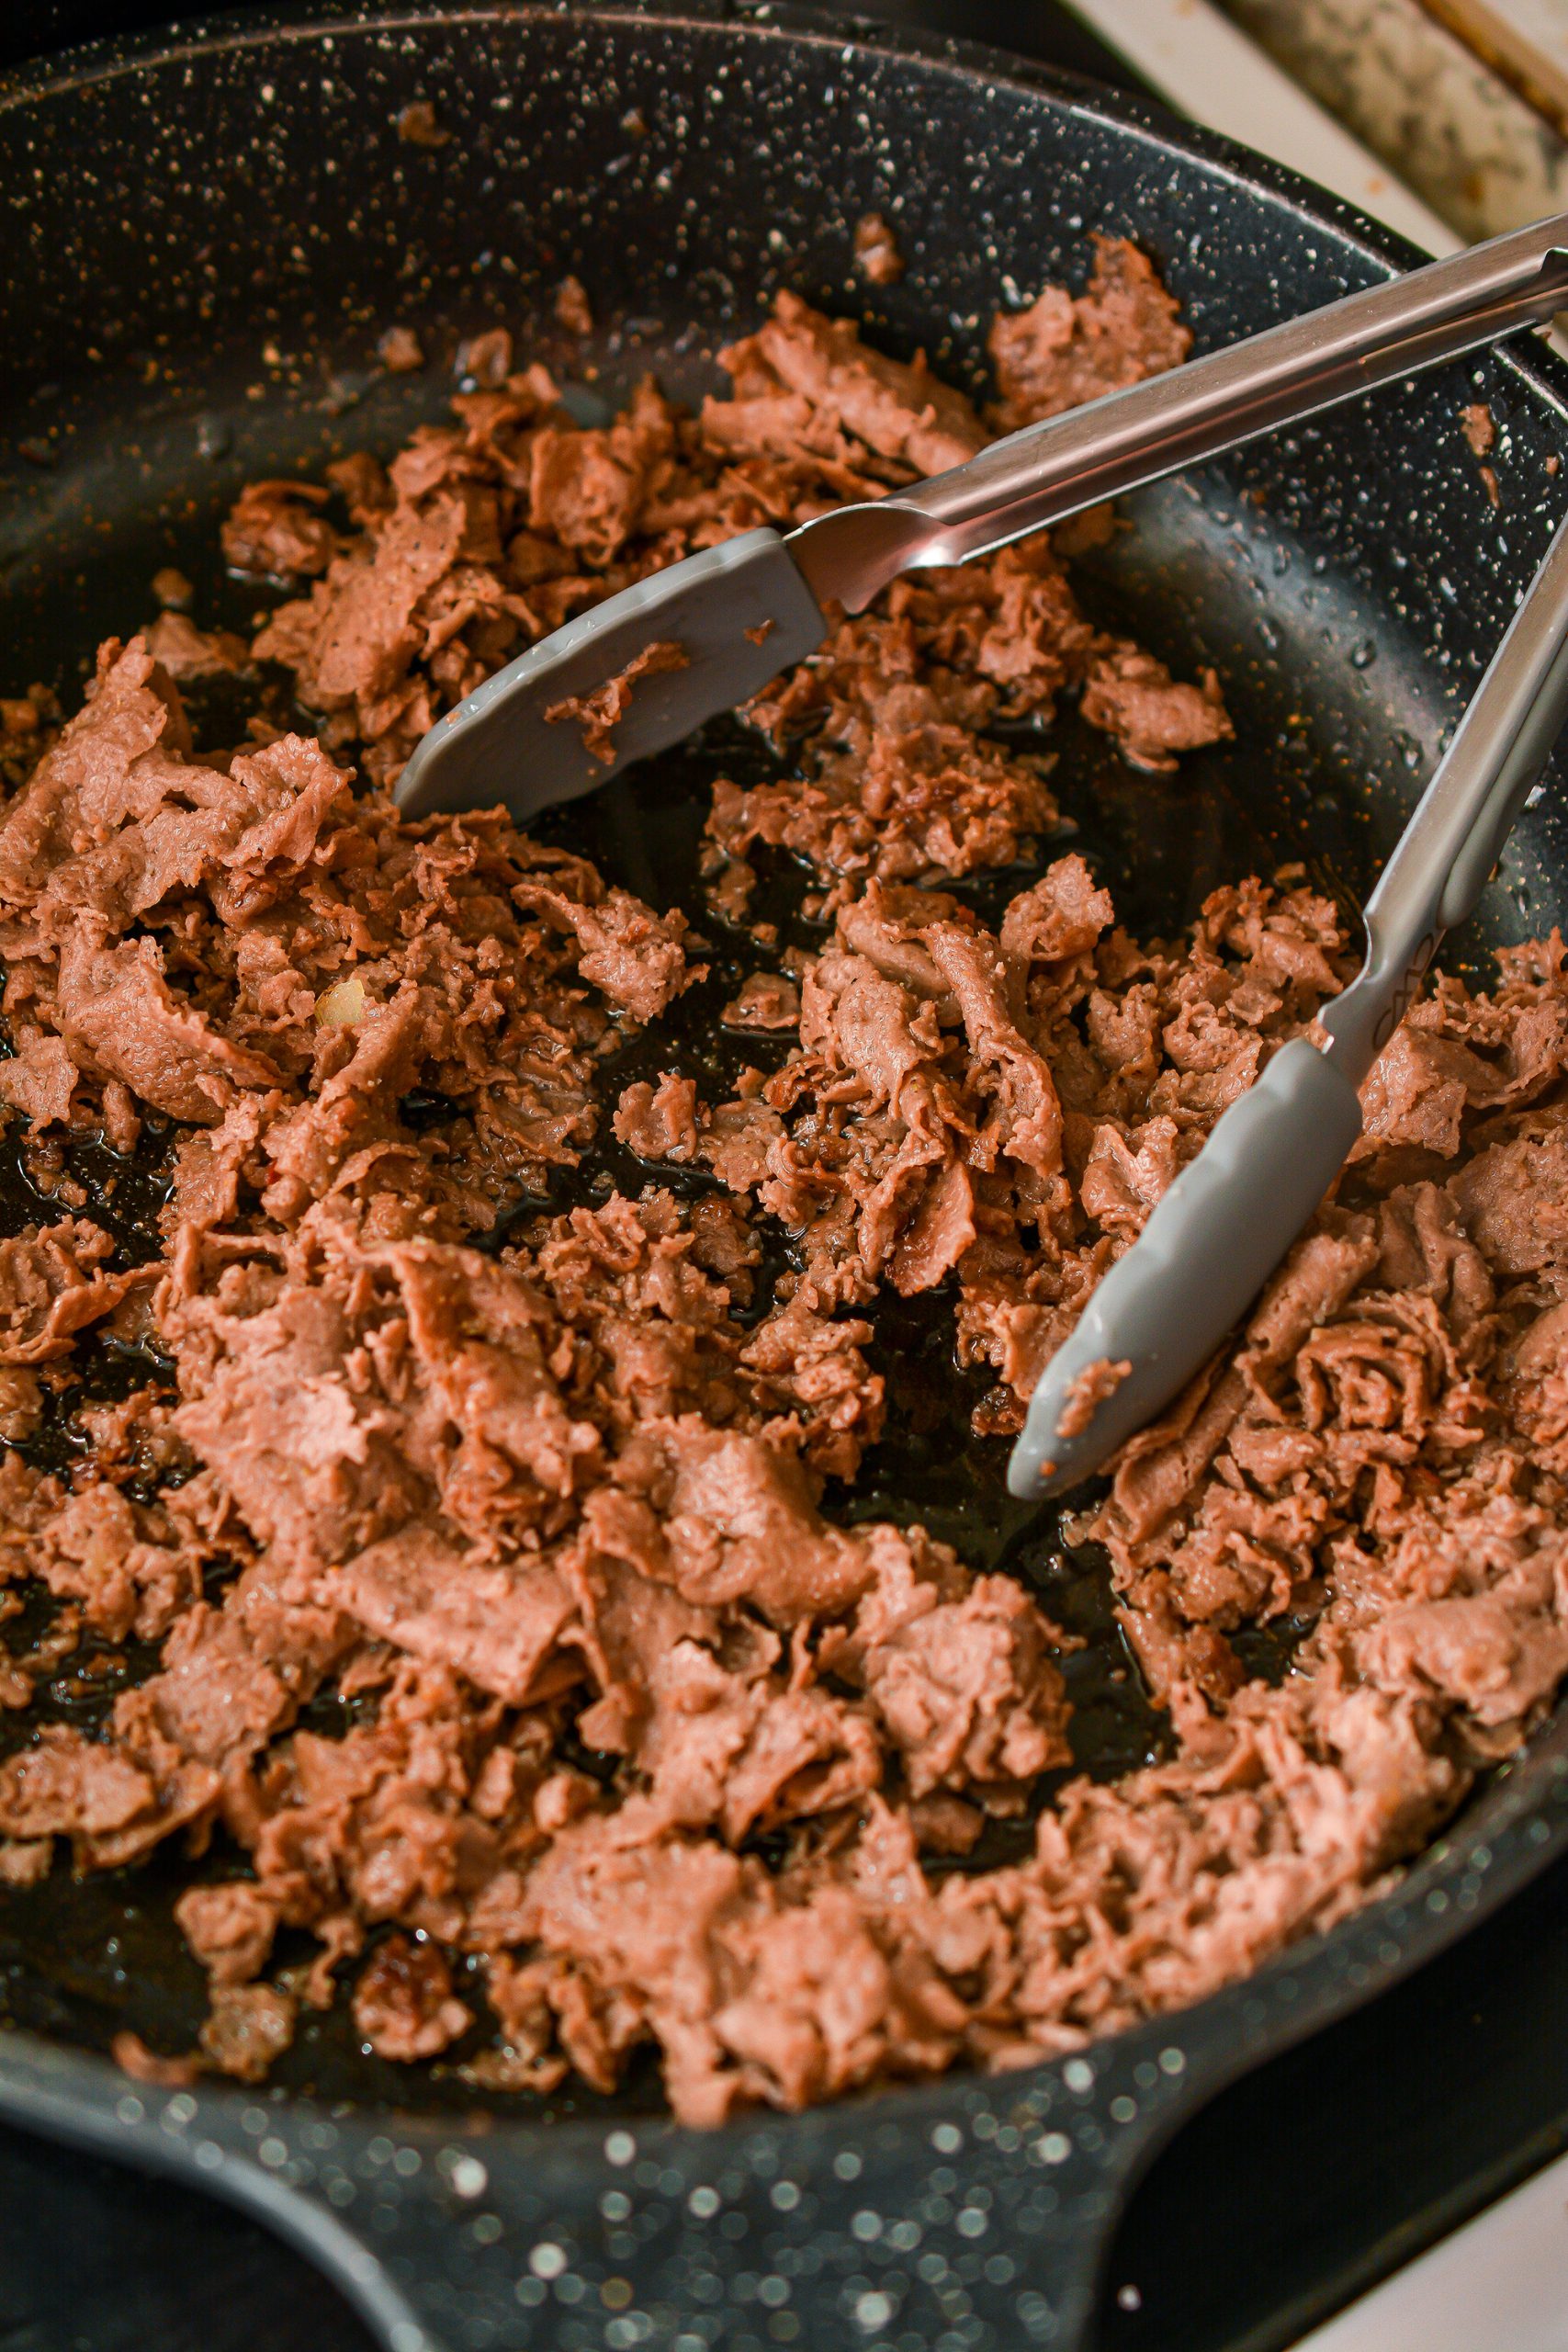 Cook the meat over medium high heat until browned completely, and drain any excess fat.